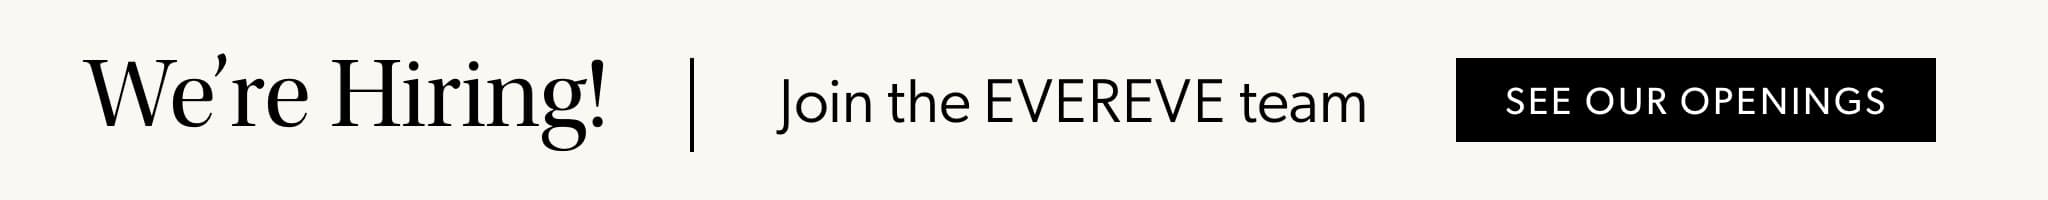 We're Hiring! Join the EVEREVE team - SEE OUR OPENINGS